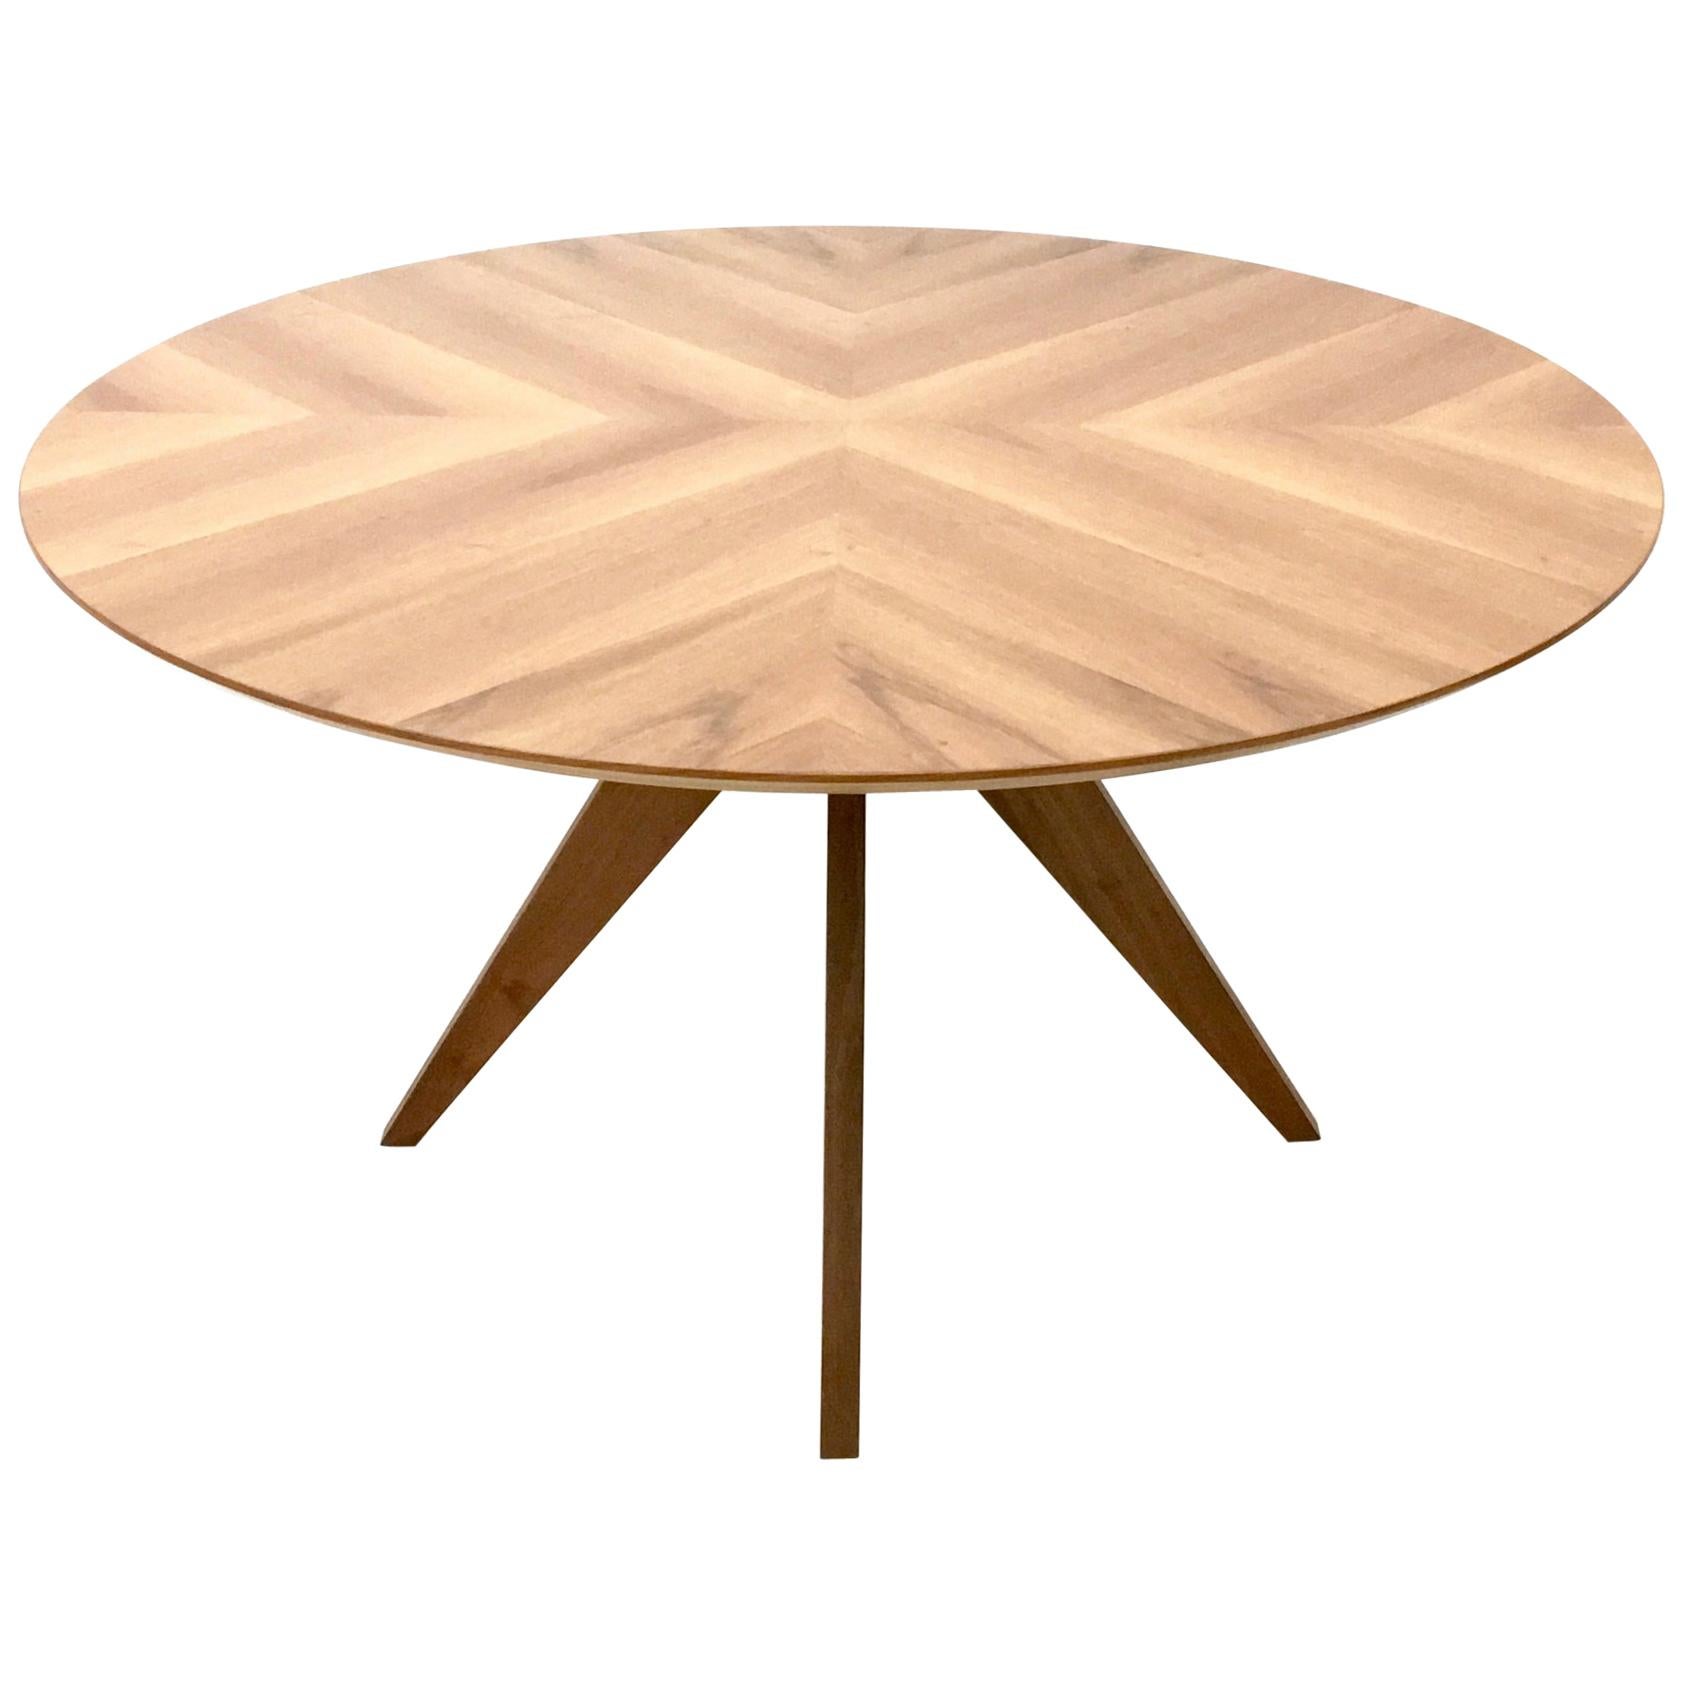 Round Walnut Dining Table in 1950s Style, Italy, 1990s